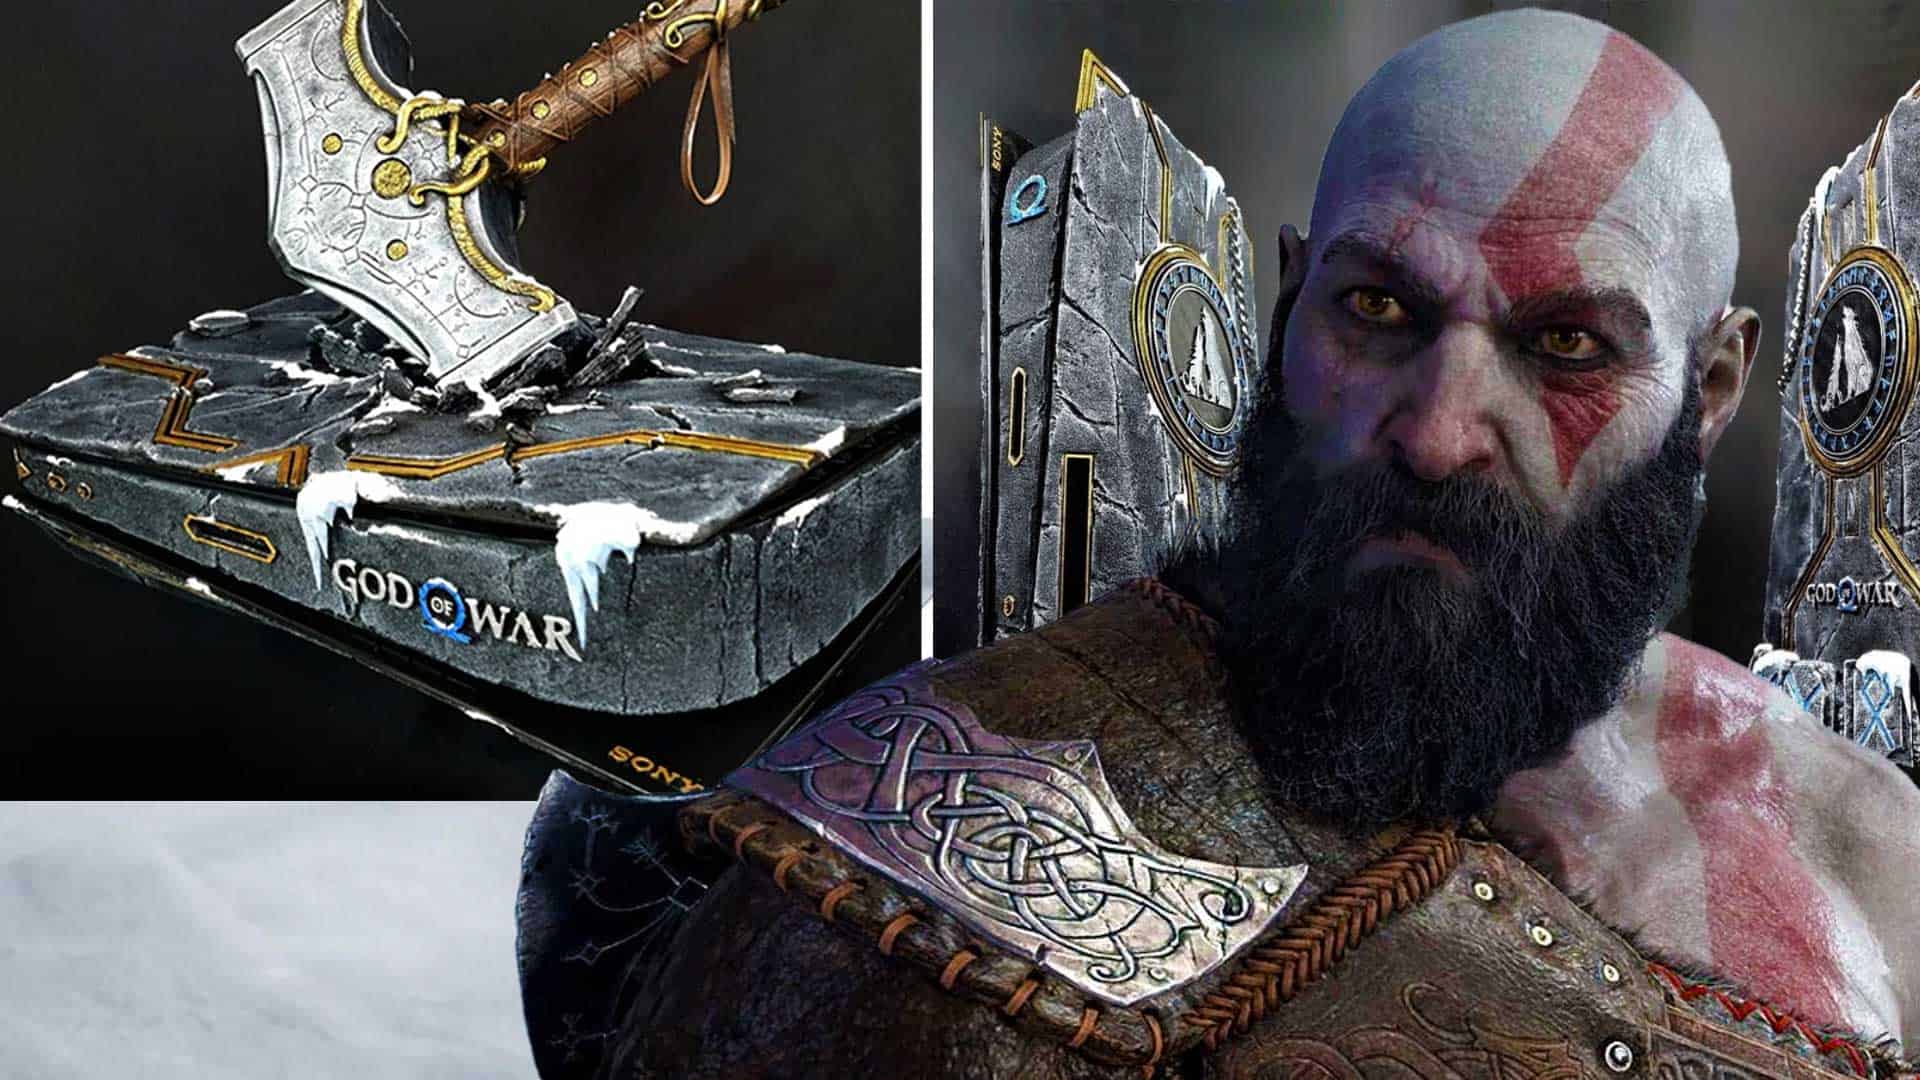 Custom stand for the God Of War: Ragnarok PS5 controller, it's a